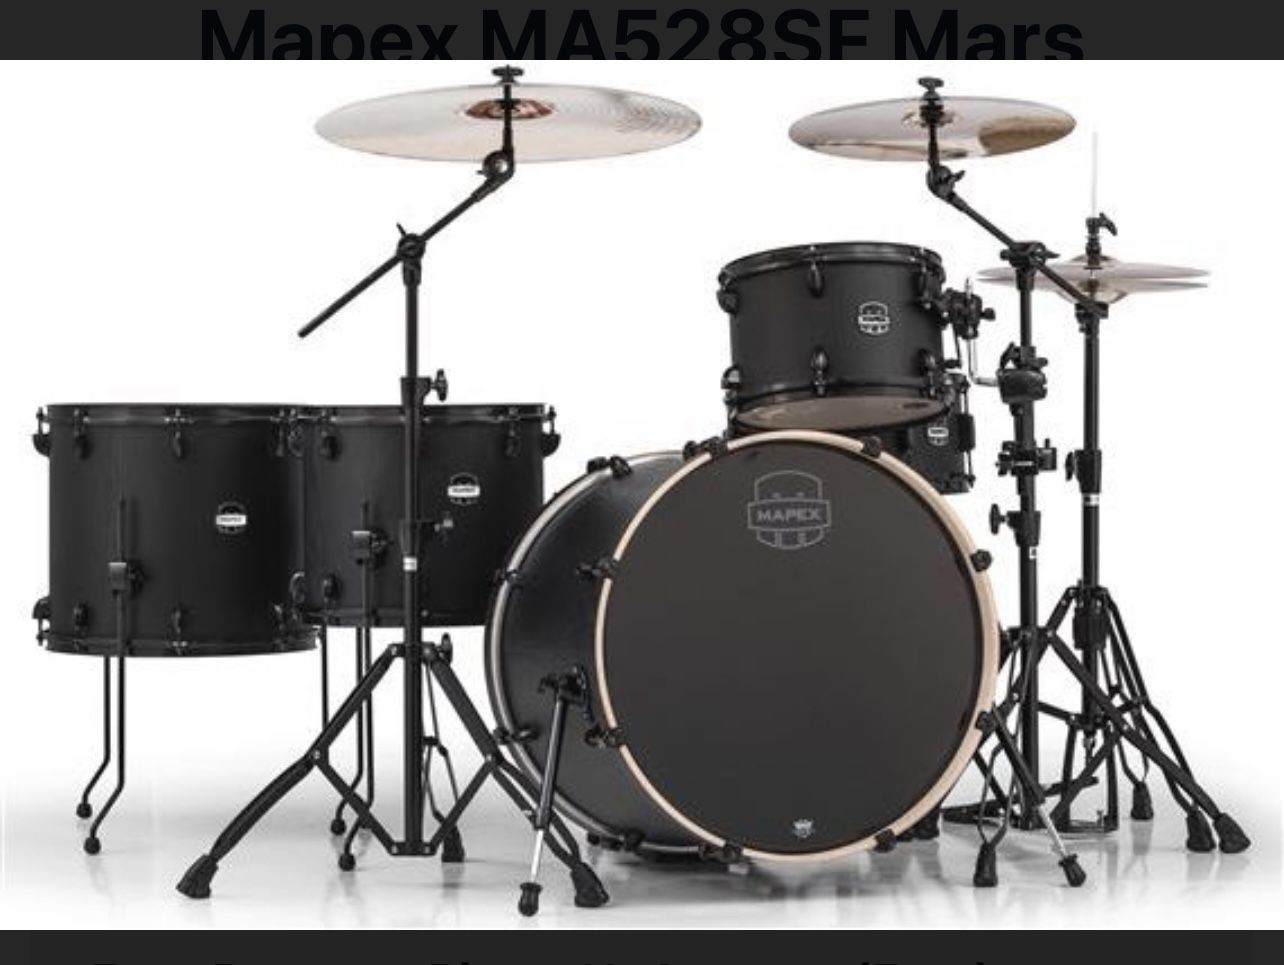 Drum Set With Cymbals 